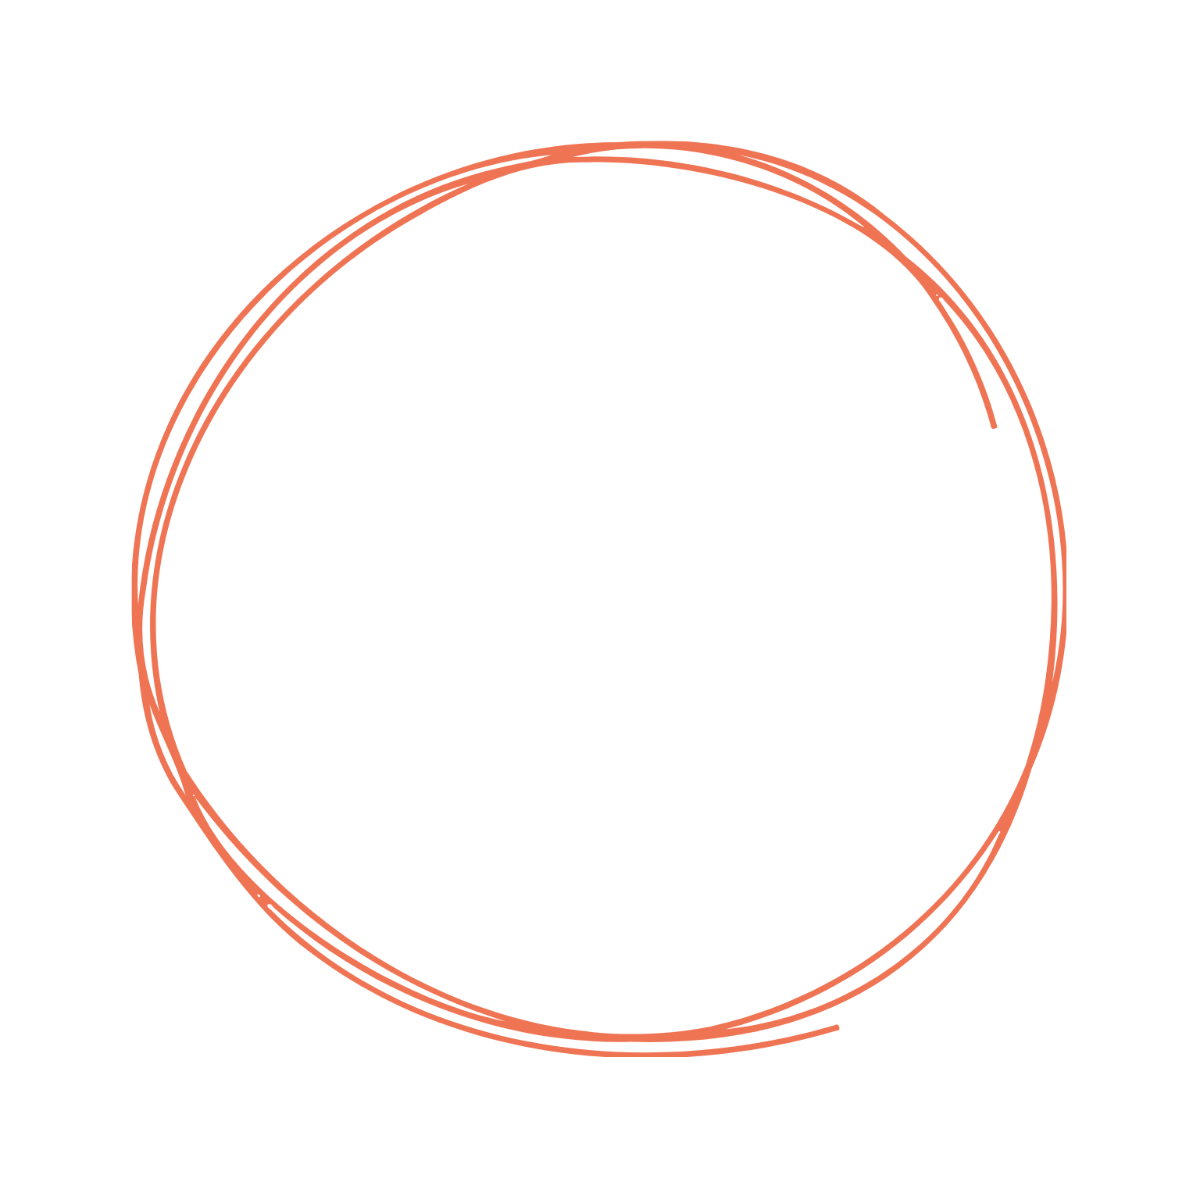 Circle Outline clipart